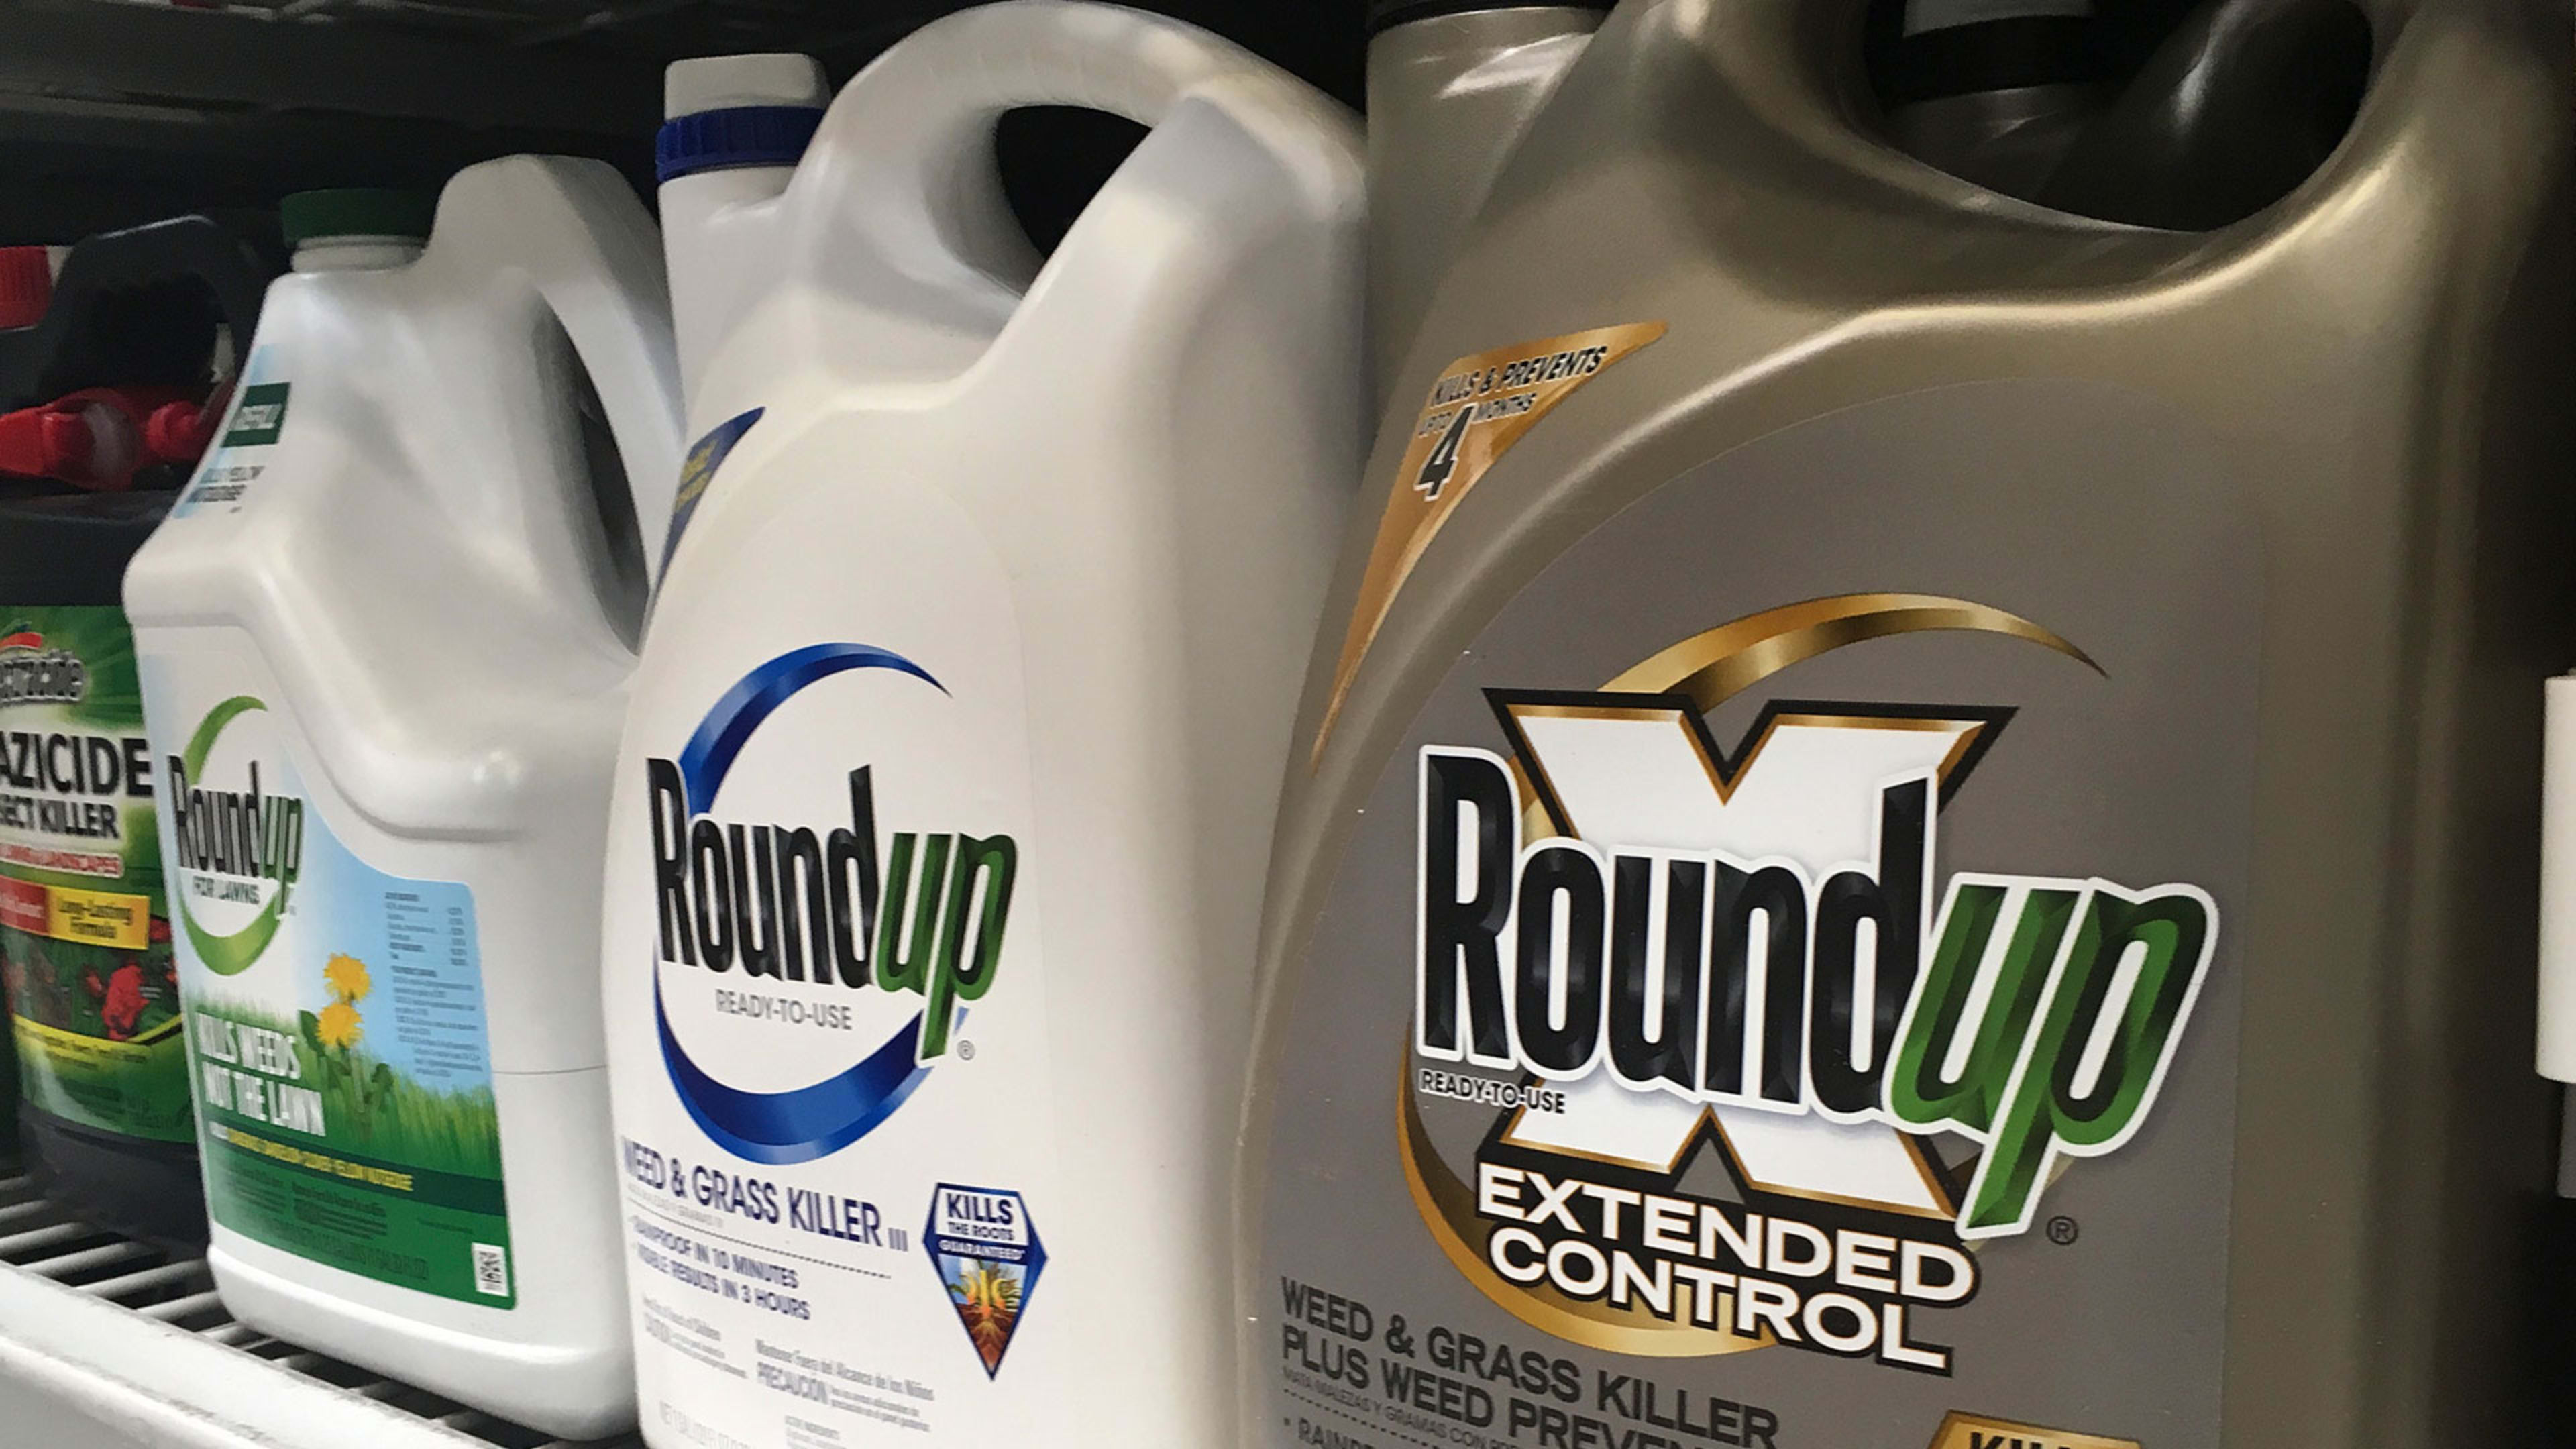 How the makers of Roundup are trying to get legal protection from cancer lawsuits